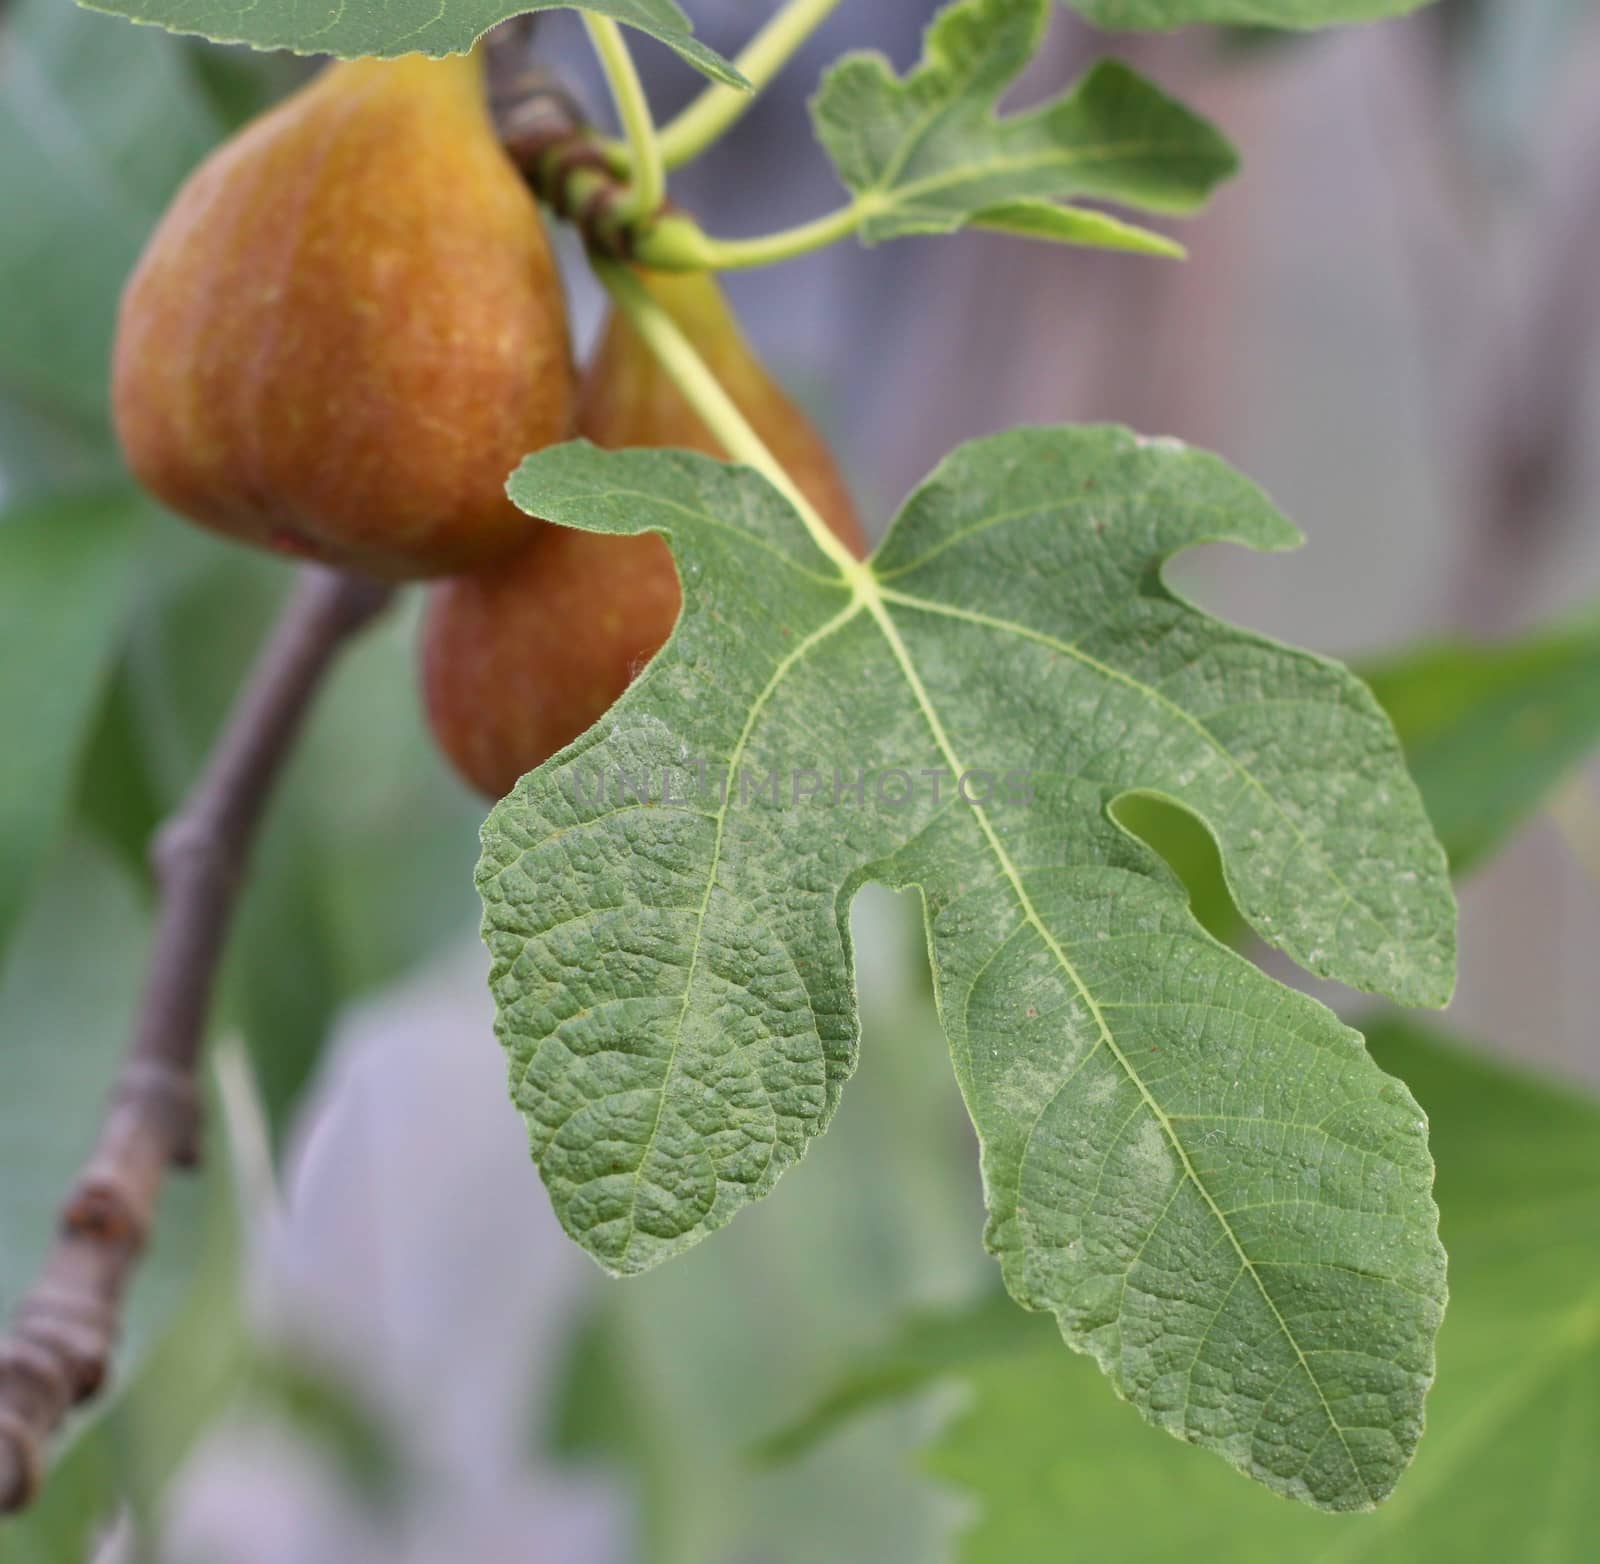 figs on the tree,figs  with leaves 